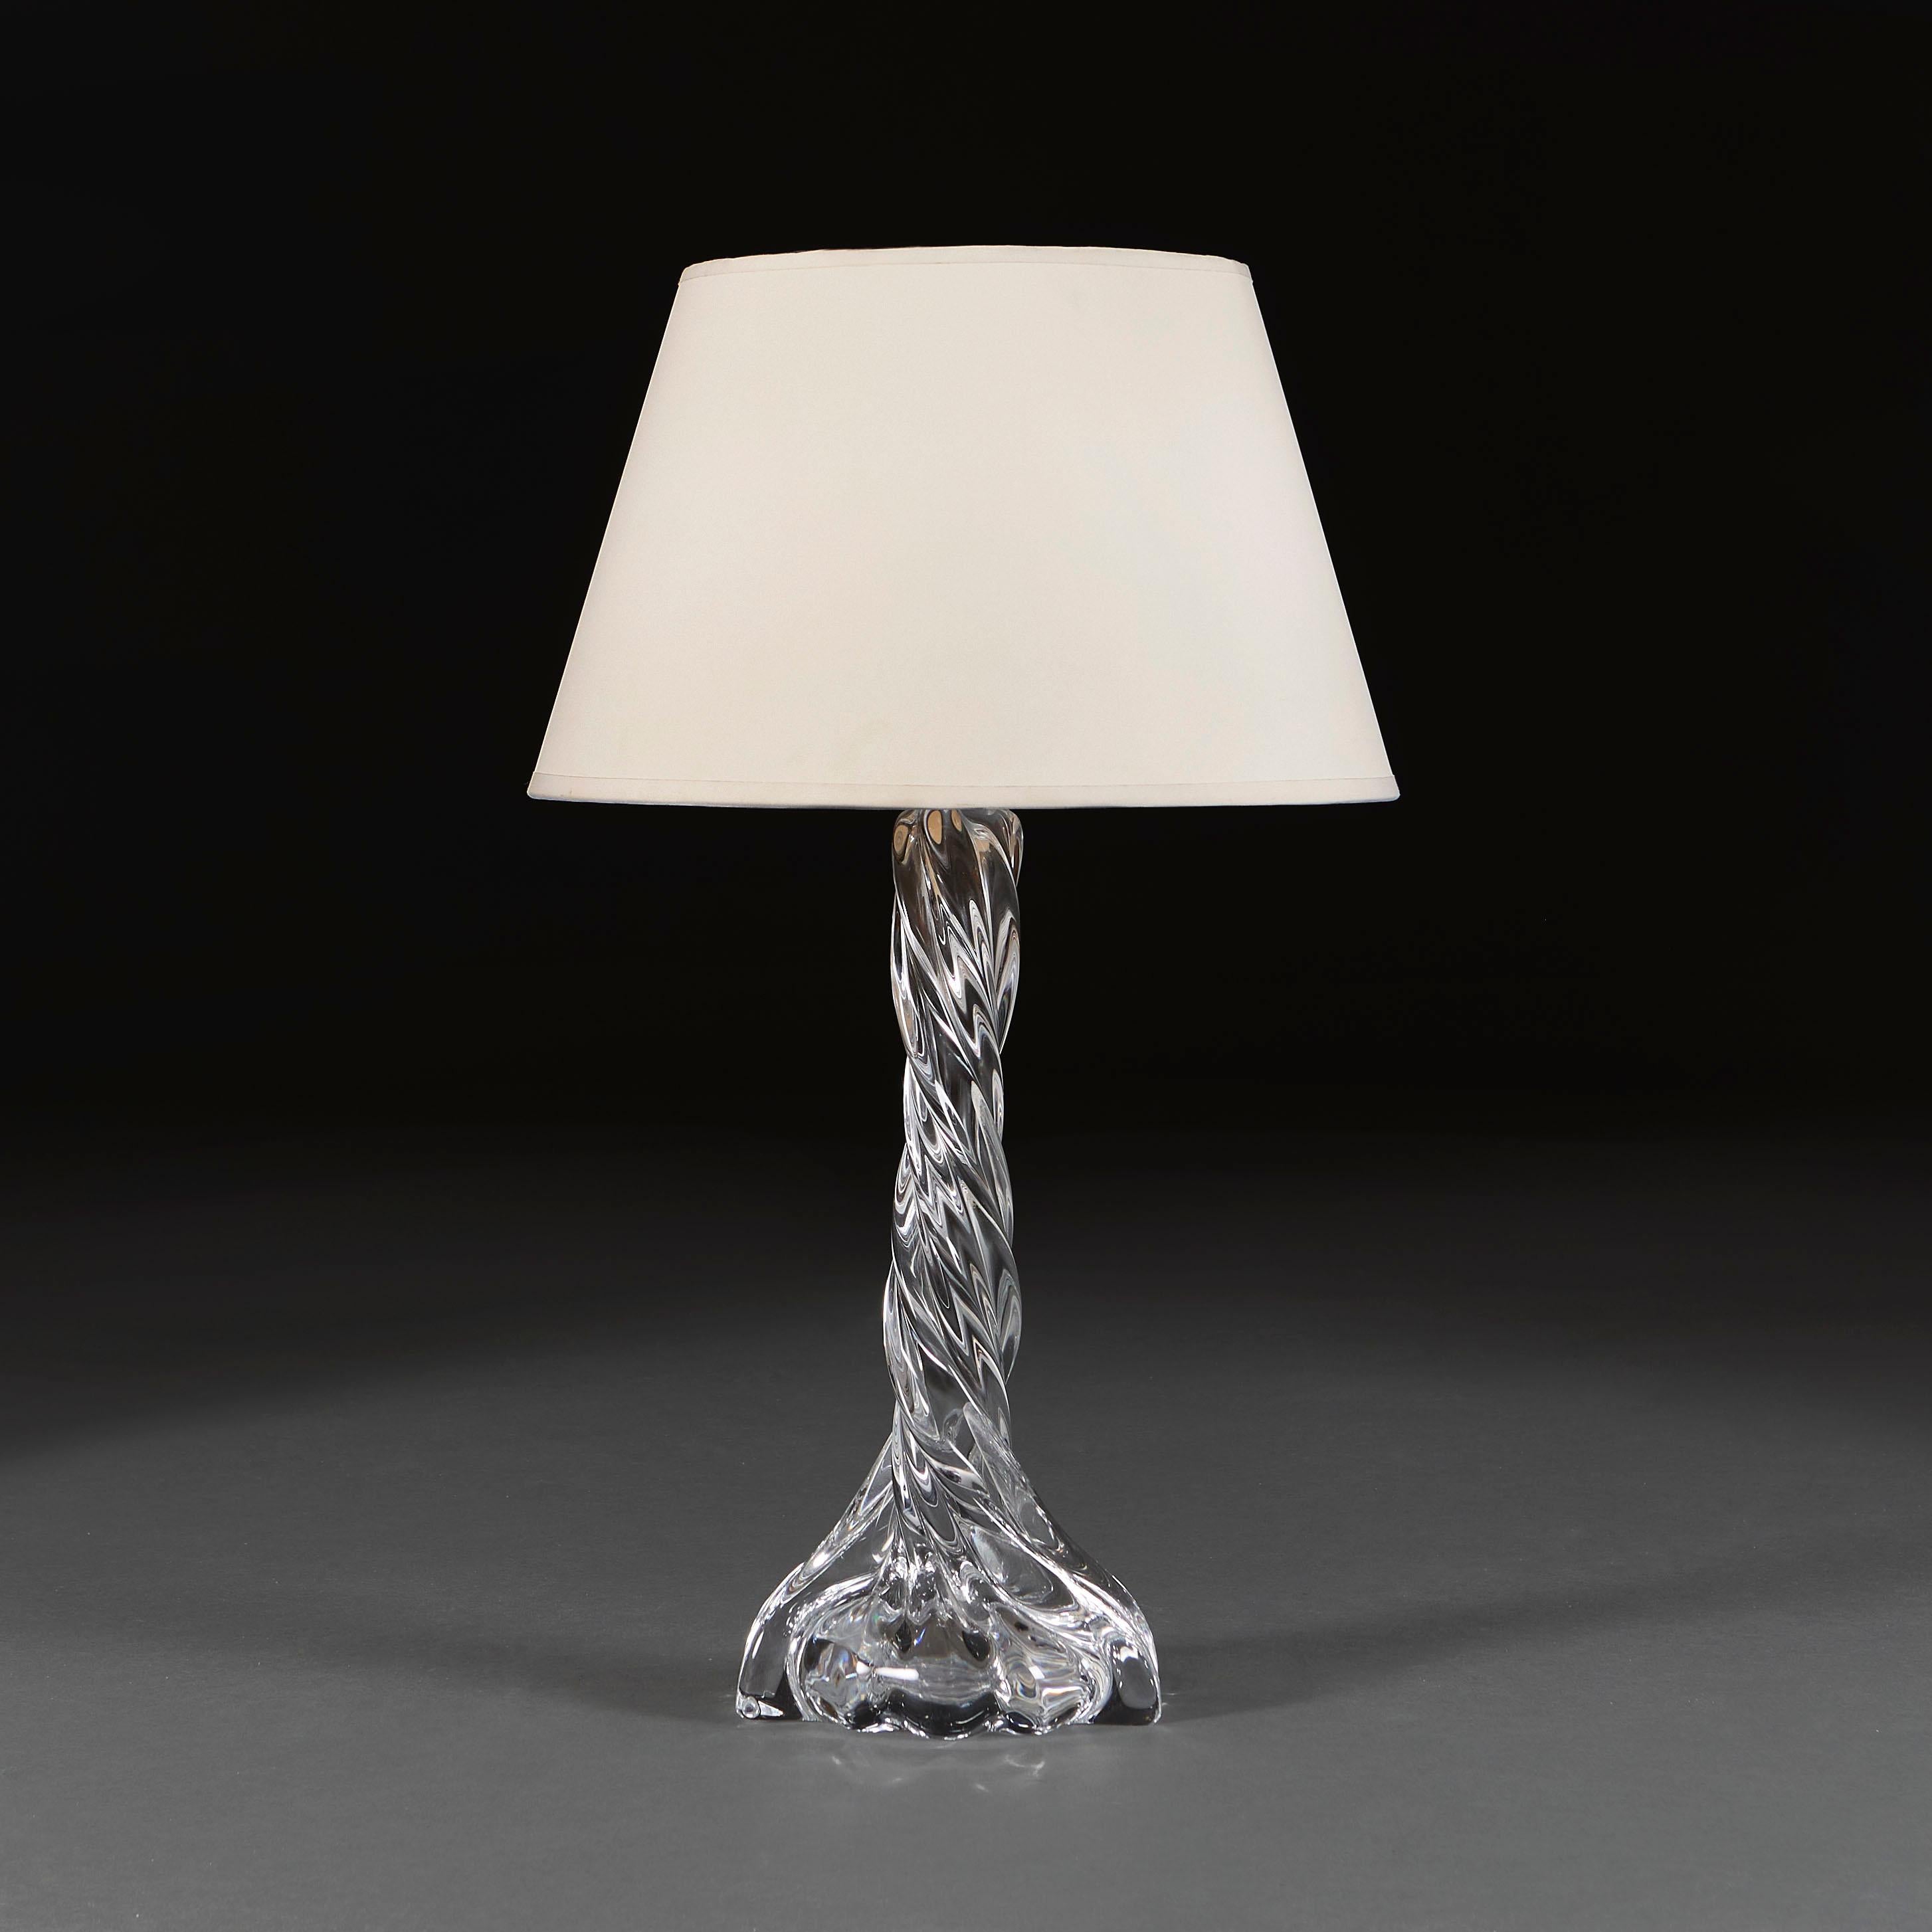 France, circa 1940.
A mid century Baccarat clear glass column lamp of twisted spiral form, stamped Baccarat to the base. 

Louis XV founded Baccarat in 1764 in the well-known glassmaking district of Lorraine. The Royal name behind the company made